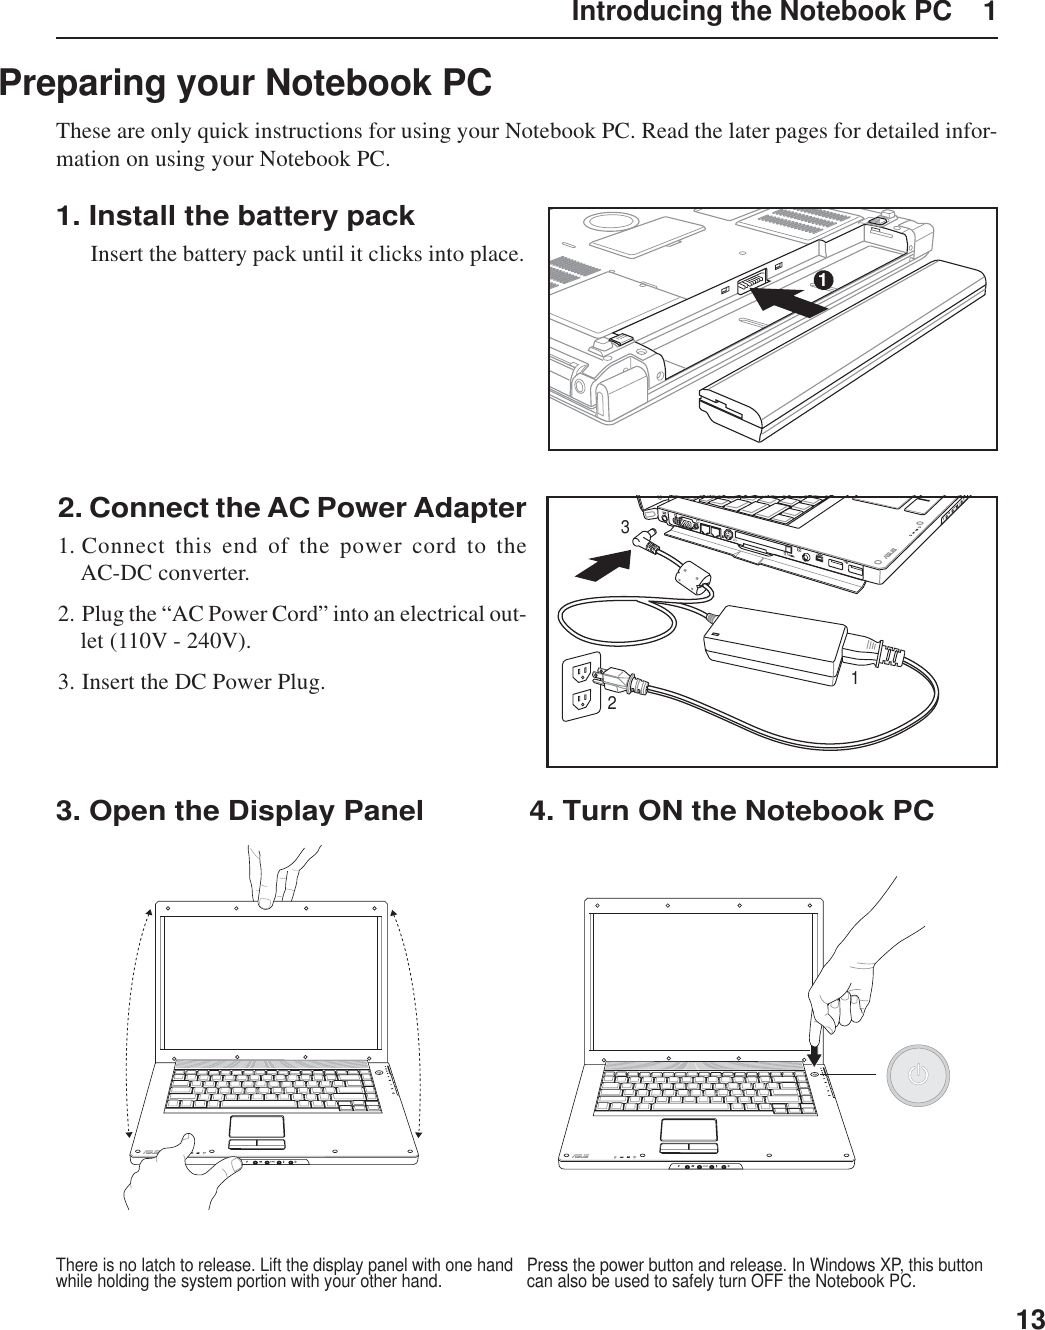 13Introducing the Notebook PC    1Preparing your Notebook PCThese are only quick instructions for using your Notebook PC. Read the later pages for detailed infor-mation on using your Notebook PC.1. Install the battery pack  Insert the battery pack until it clicks into place.2. Connect the AC Power Adapter1. Connect this end of the power cord to theAC-DC converter.2. Plug the “AC Power Cord” into an electrical out-let (110V - 240V).3. Insert the DC Power Plug.3. Open the Display PanelPress the power button and release. In Windows XP, this buttoncan also be used to safely turn OFF the Notebook PC.There is no latch to release. Lift the display panel with one handwhile holding the system portion with your other hand.4. Turn ON the Notebook PC1123